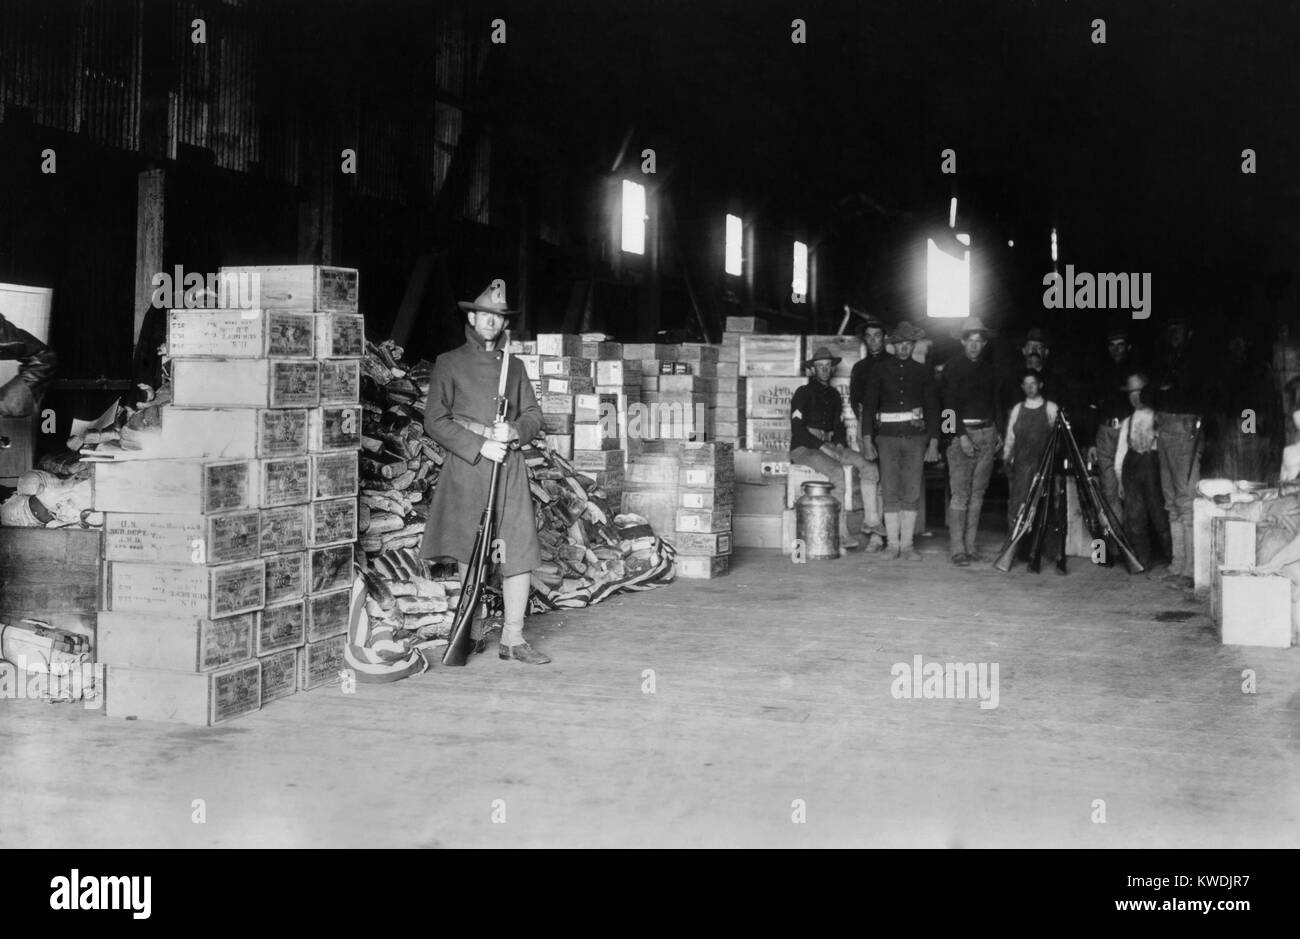 Soldiers guarding relief supplies in San Francisco after the April 1906 earthquake. By April 30, the Army set up nine food depots to distribute rations to 300,000 people. Each civilian was fed the equivalent of three-quarters of an enlisted mans rations (BSLOC 2017 17 39) Stock Photo